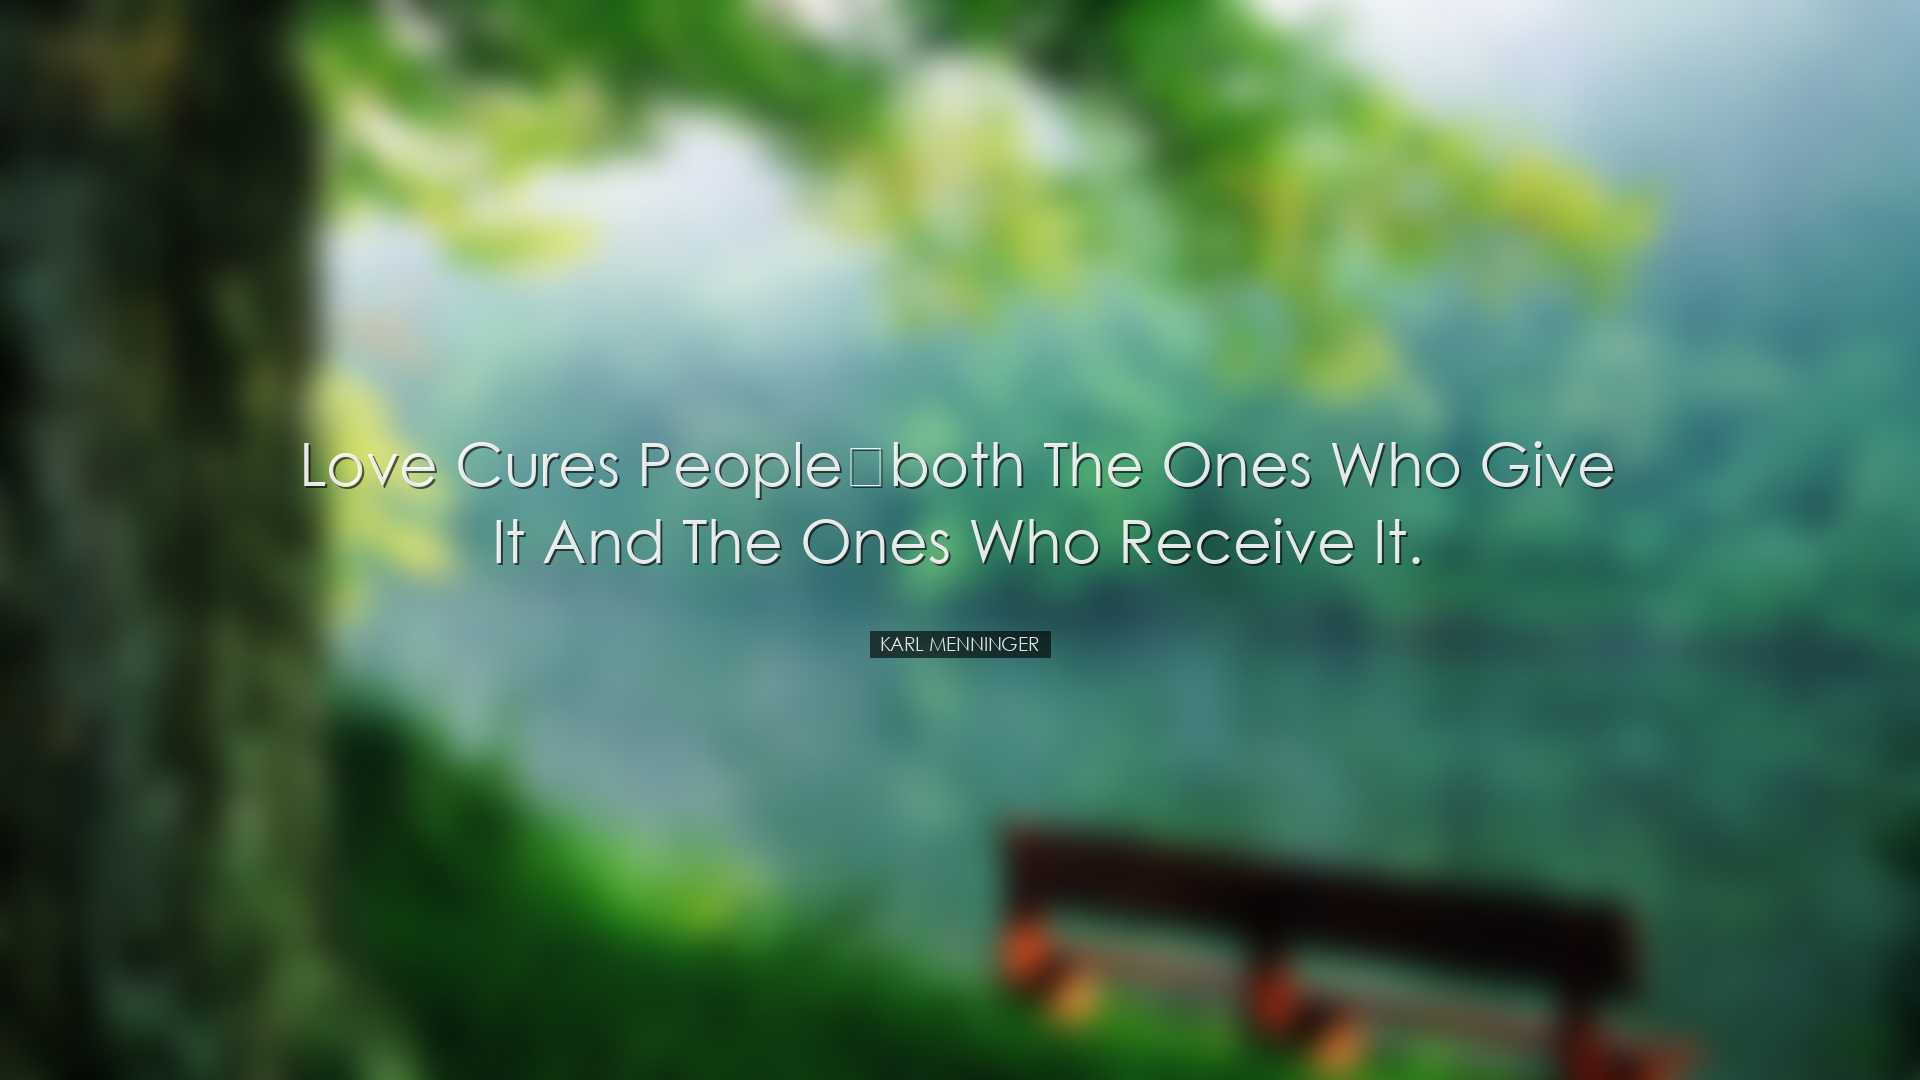 Love cures people—both the ones who give it and the ones who rec